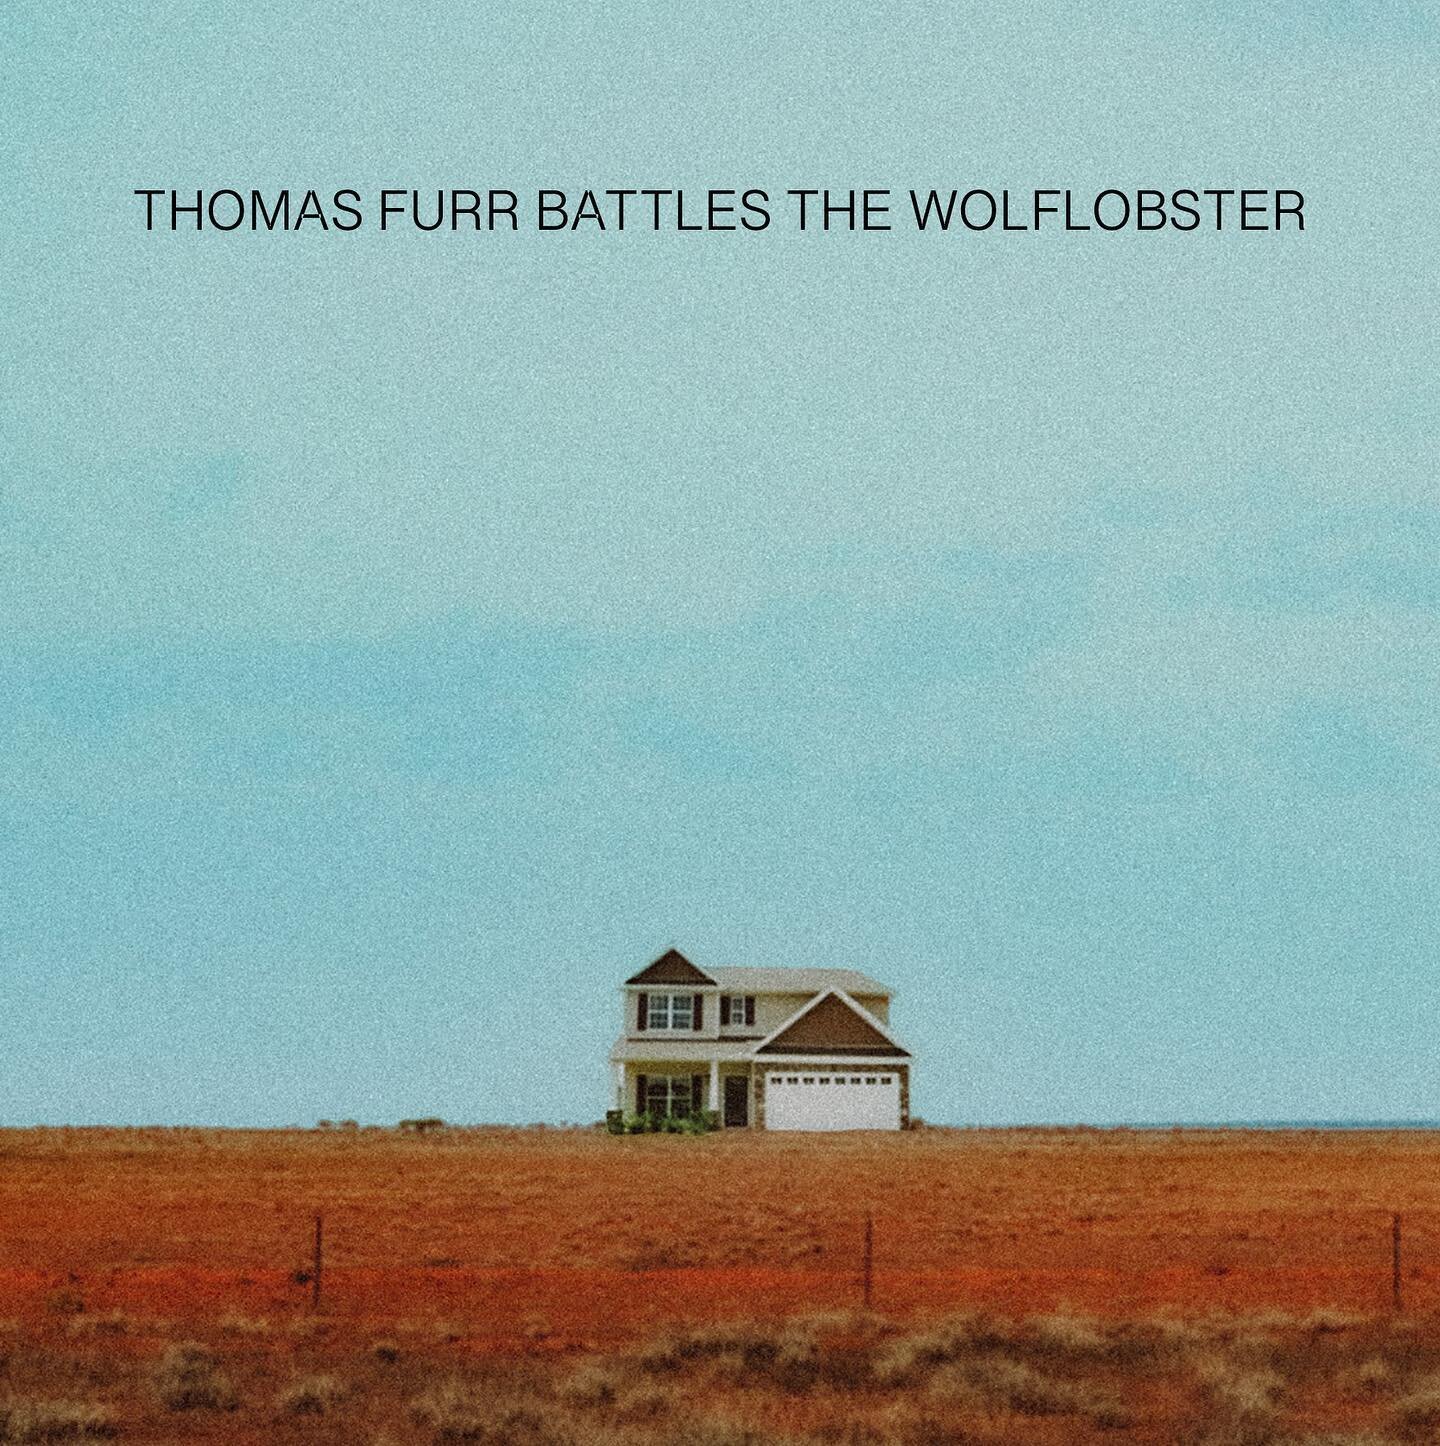 THOMAS FURR BATTLES THE WOLFLOBSTER 🐺 🦞 
///
Lo-fi bedroom folk
///
10 tracks to fall asleep too. 
///
A long time coming, buried in the archives and now finally available on all streaming platforms.
.
.
.
.
#music #new #newmusic #album #lofi #bedr